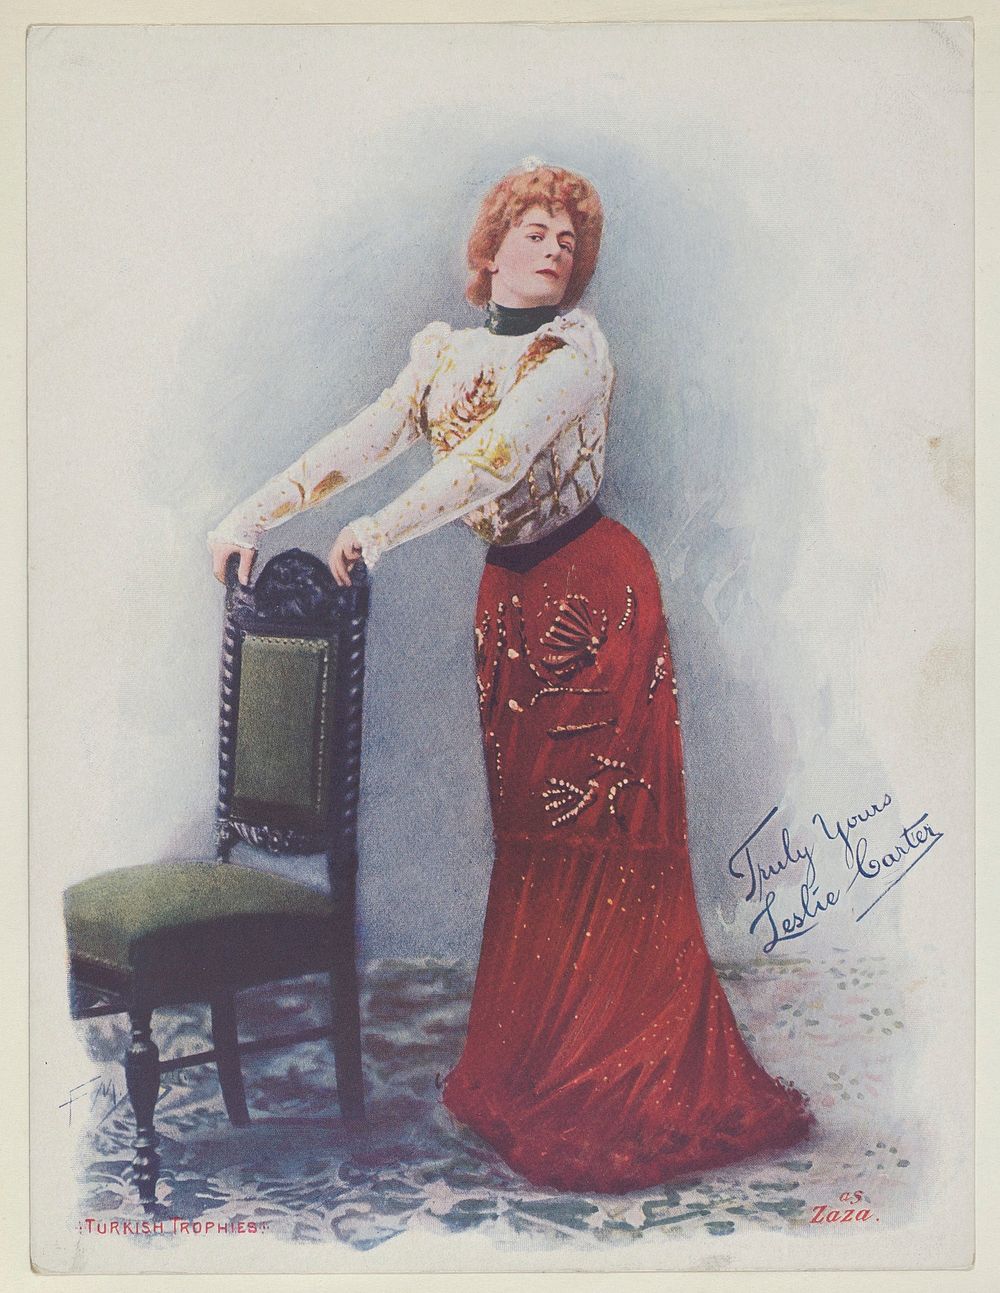 Leslie Carter as Zaza, from the Actresses series (T1), distributed by the American Tobacco Co. to promote Turkish Trophies…